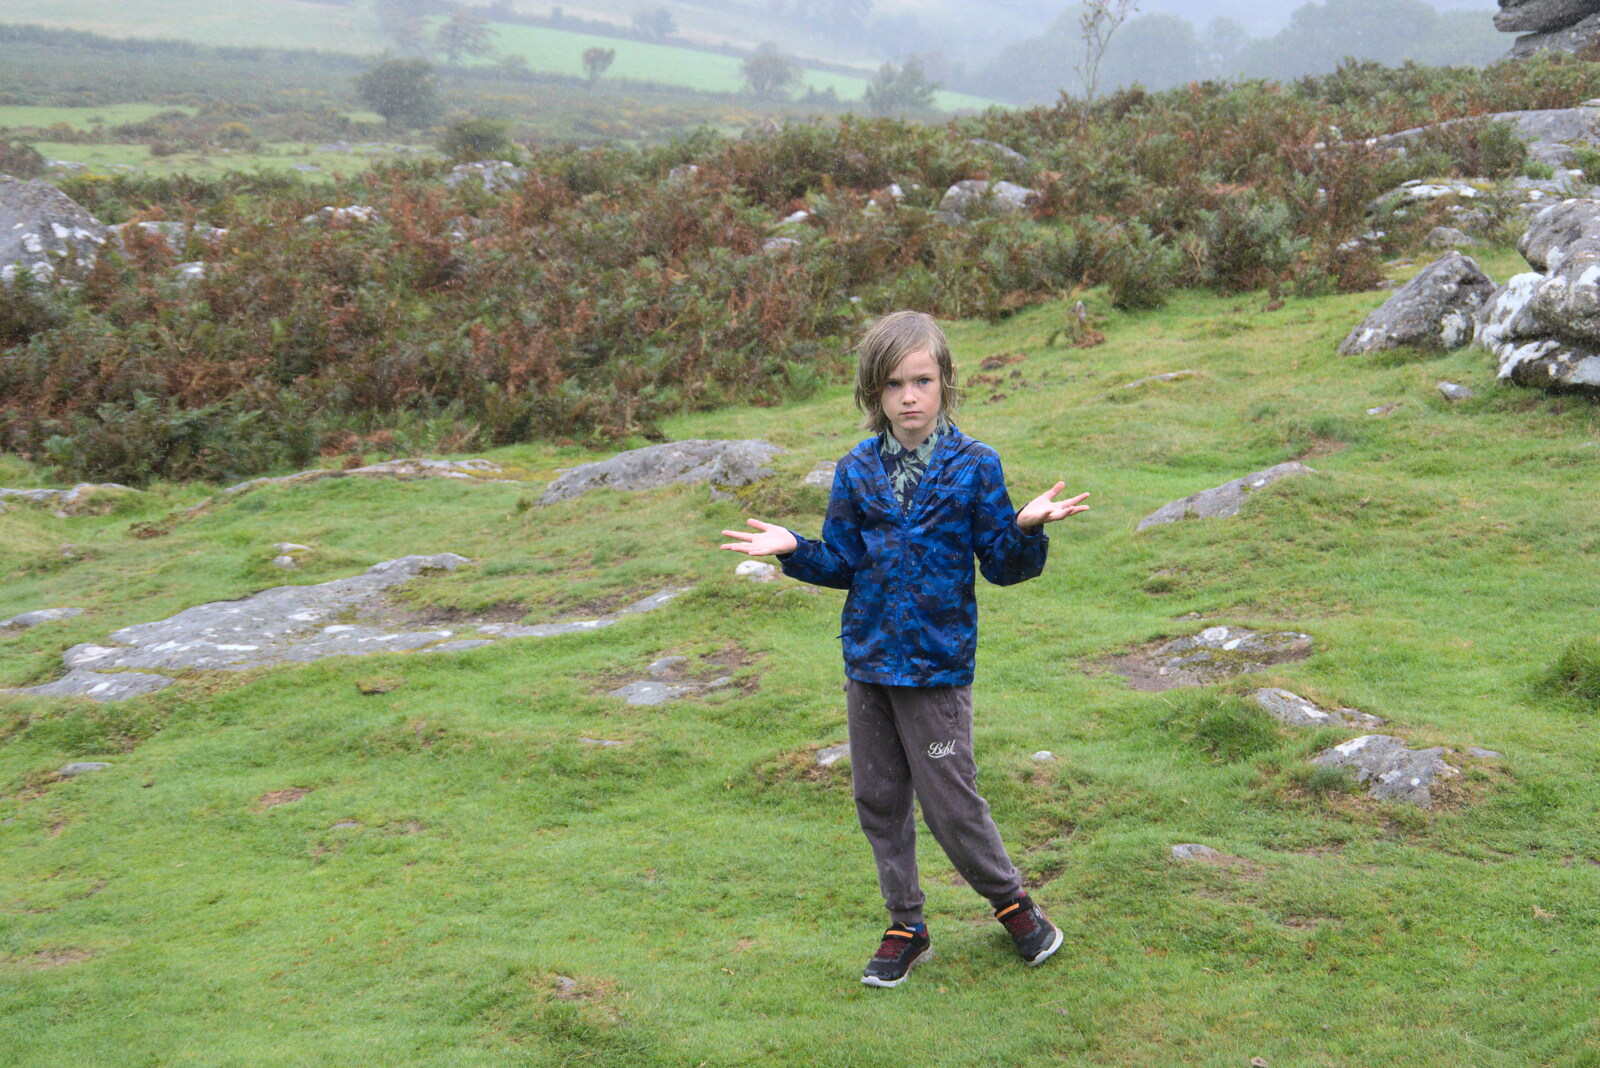 Harry is extremely wet from A Walk up Hound Tor, Dartmoor, Devon - 24th August 2020